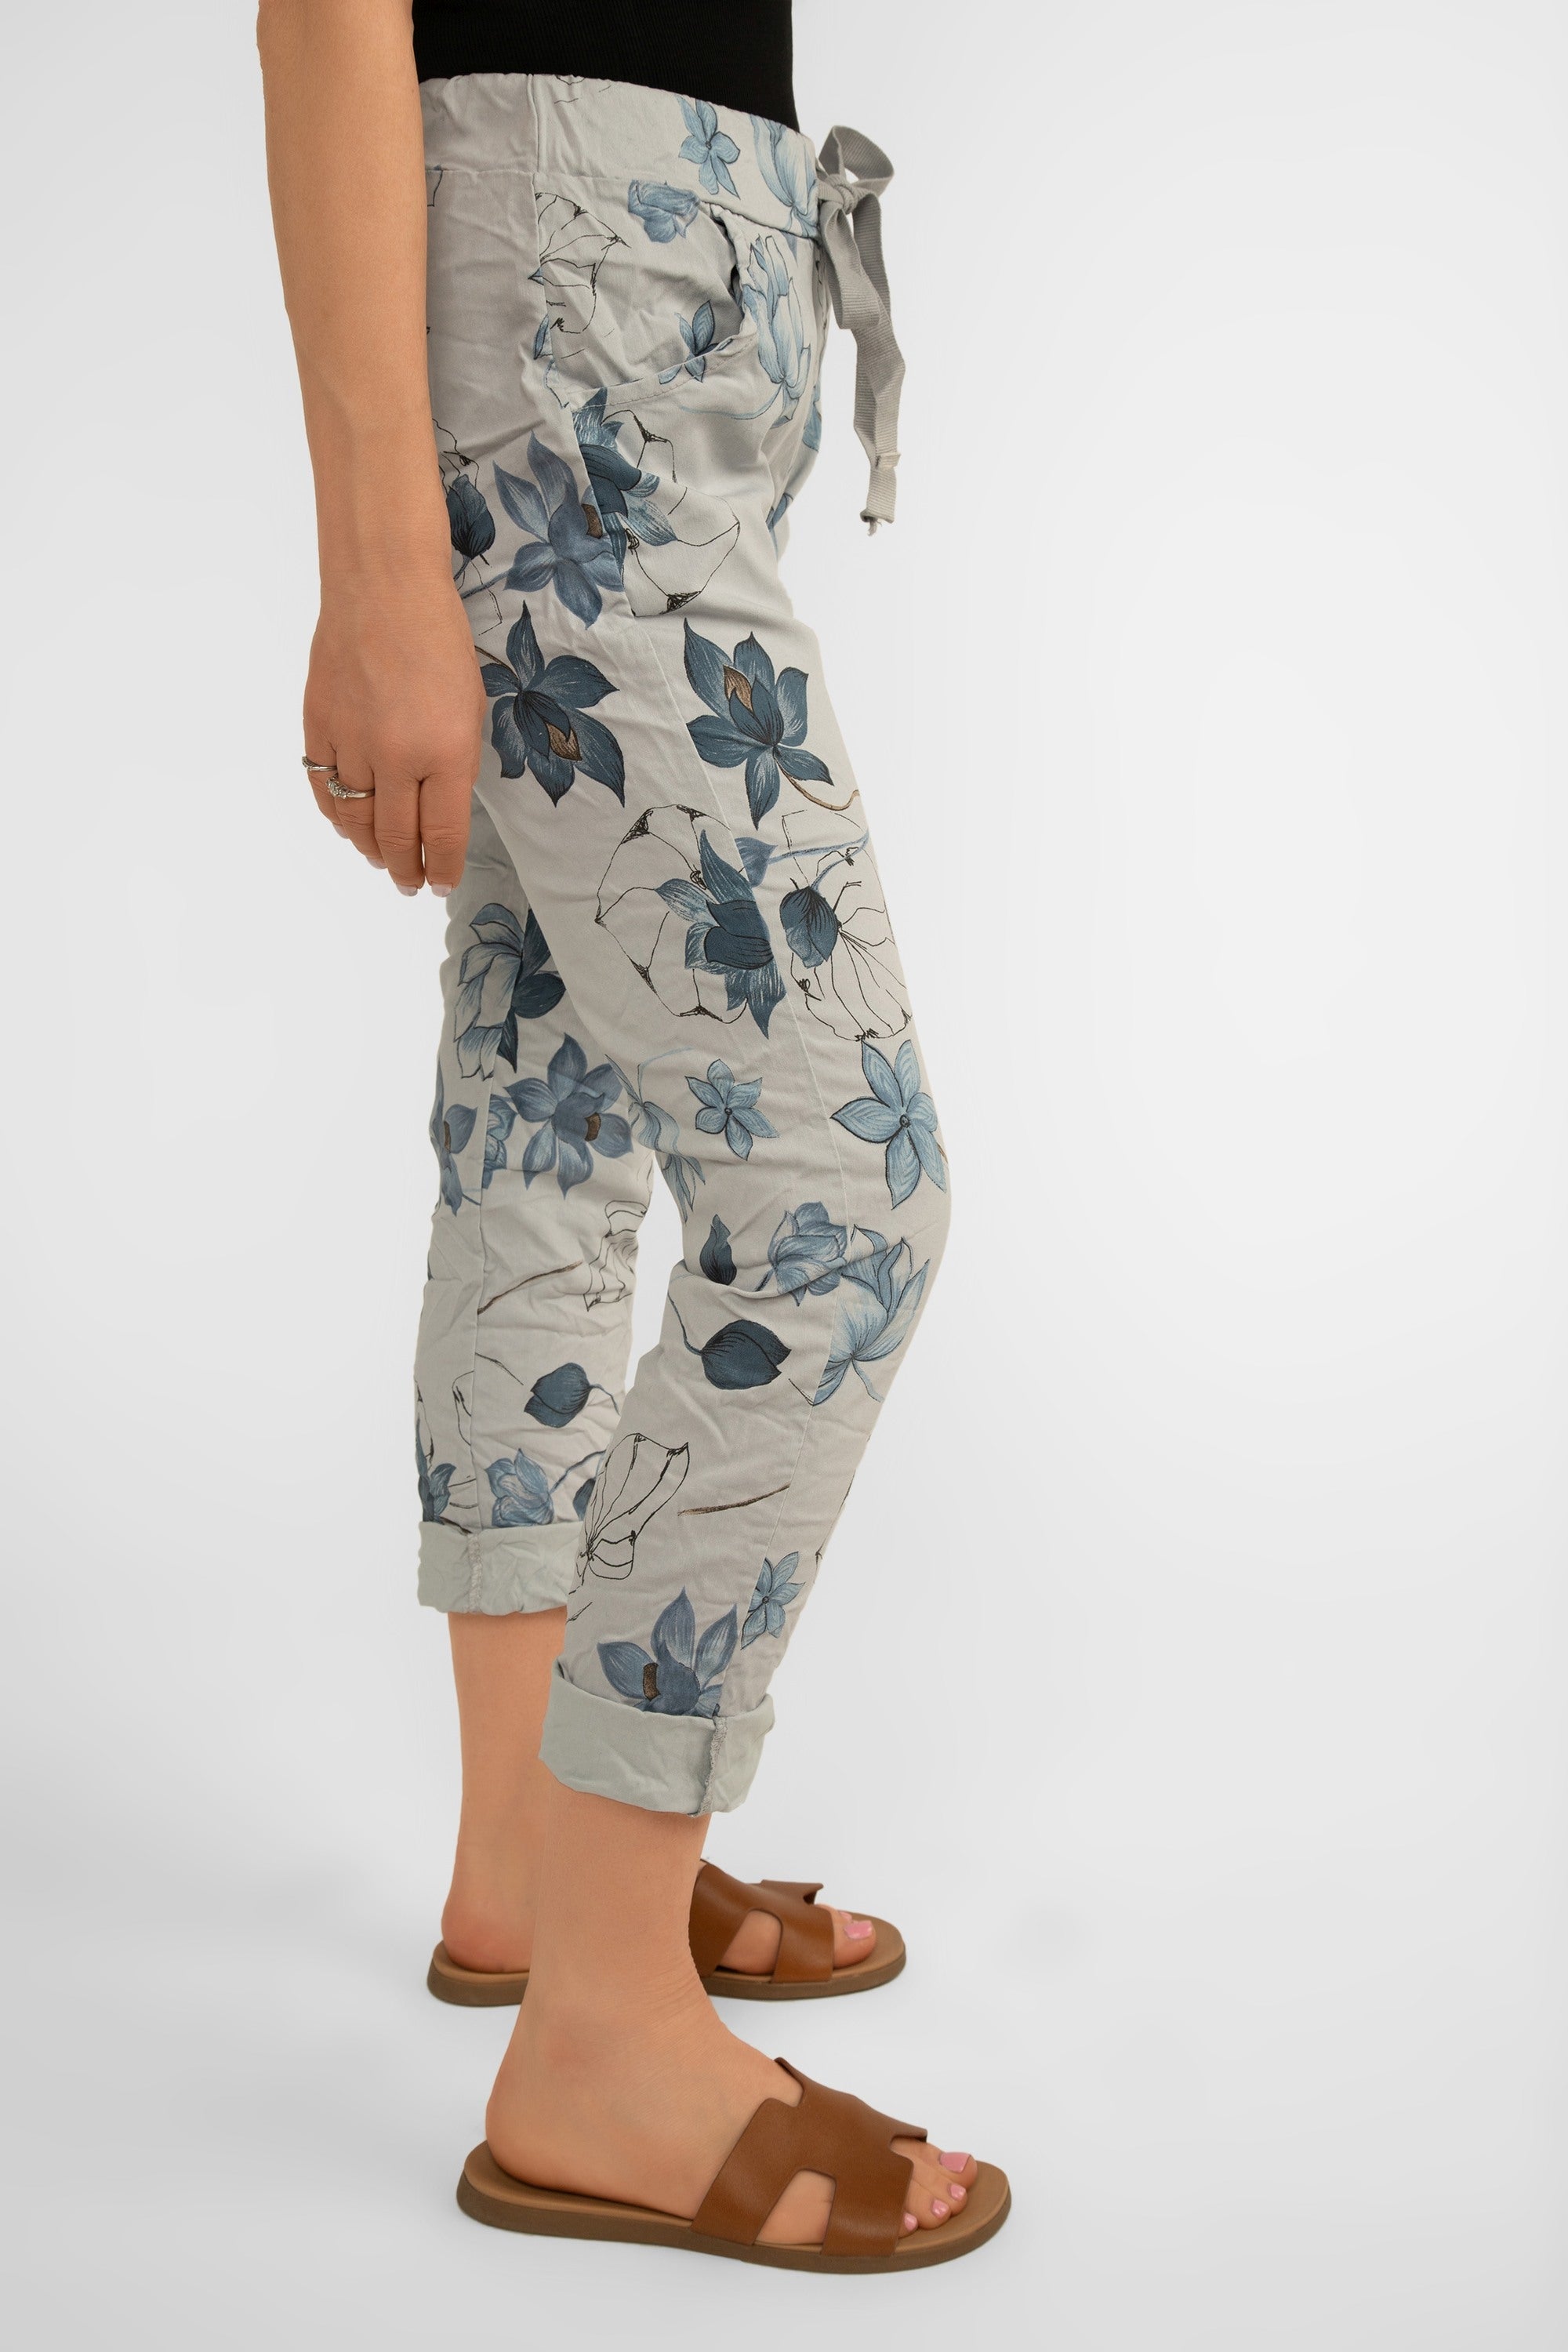 Side view of Bella Amore (21036) Women's Pull On Crinkle Pants with Side Pockets, Rolled Hem, and Blue Lotus Flower Print in Grey